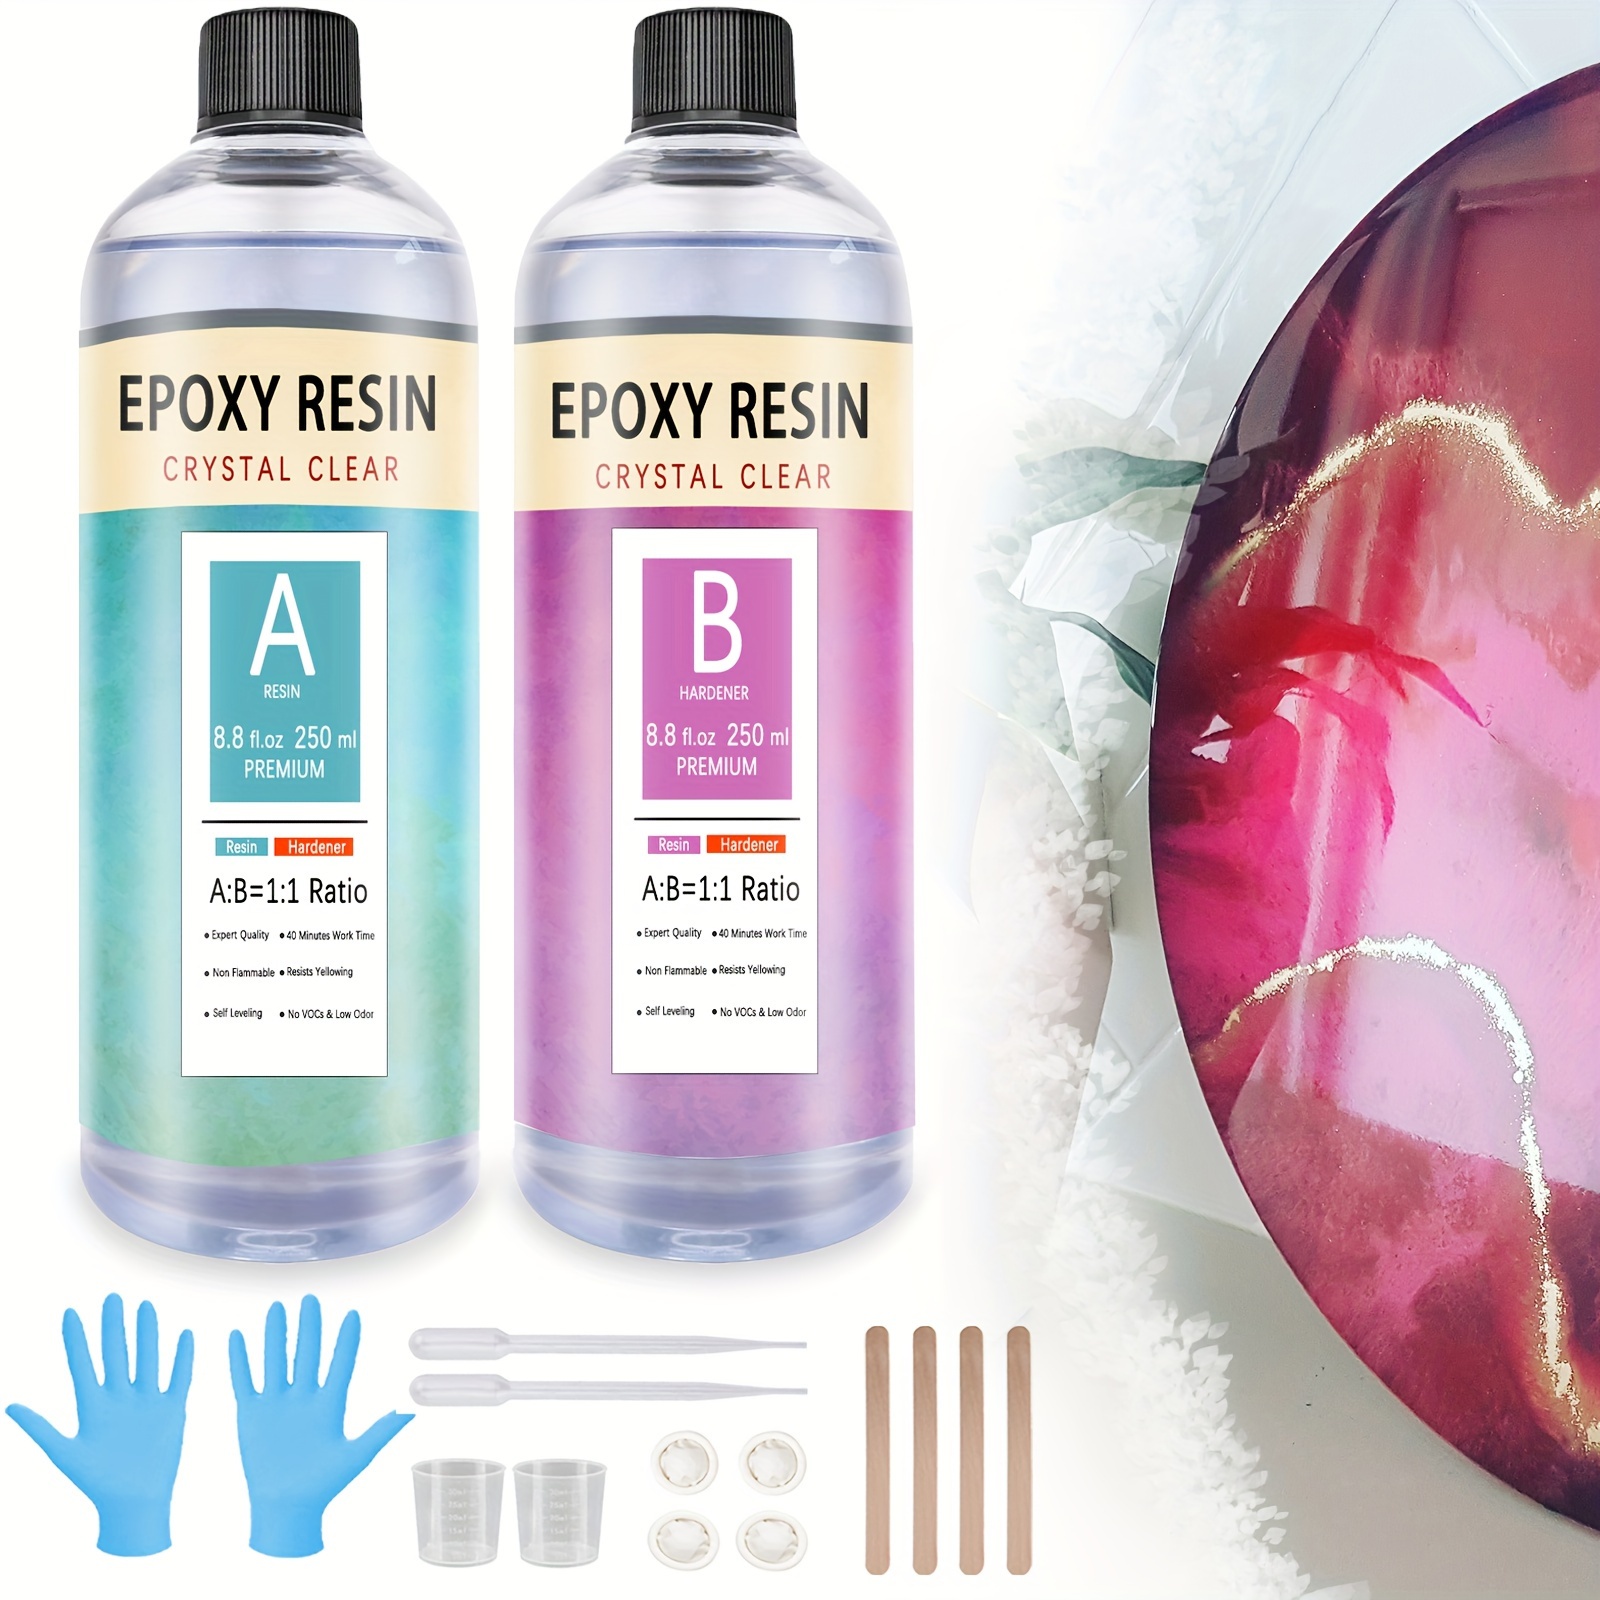 Teexpert Crystal Clear Epoxy Resin Kit 2 Gallon Self-Leveling Coating and Casting Resin, High-Gloss & Bubbles Free Resin and Hardener Kit for DIY